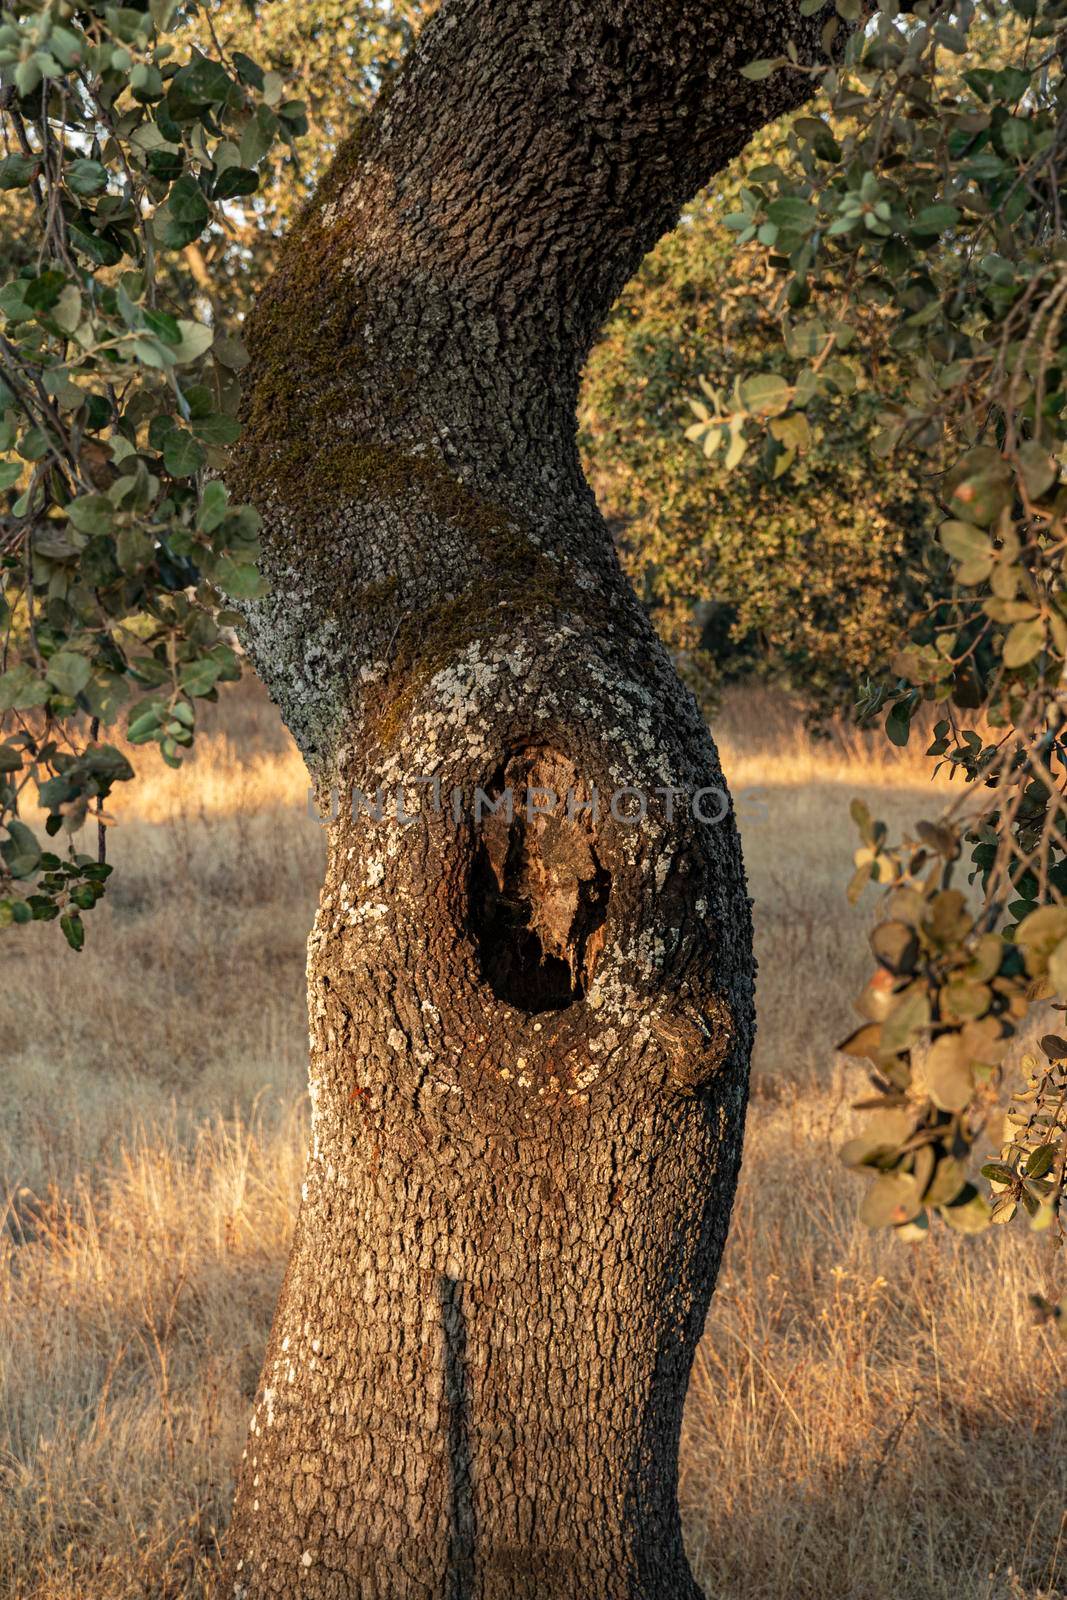 A tree trunk with a deep cleft